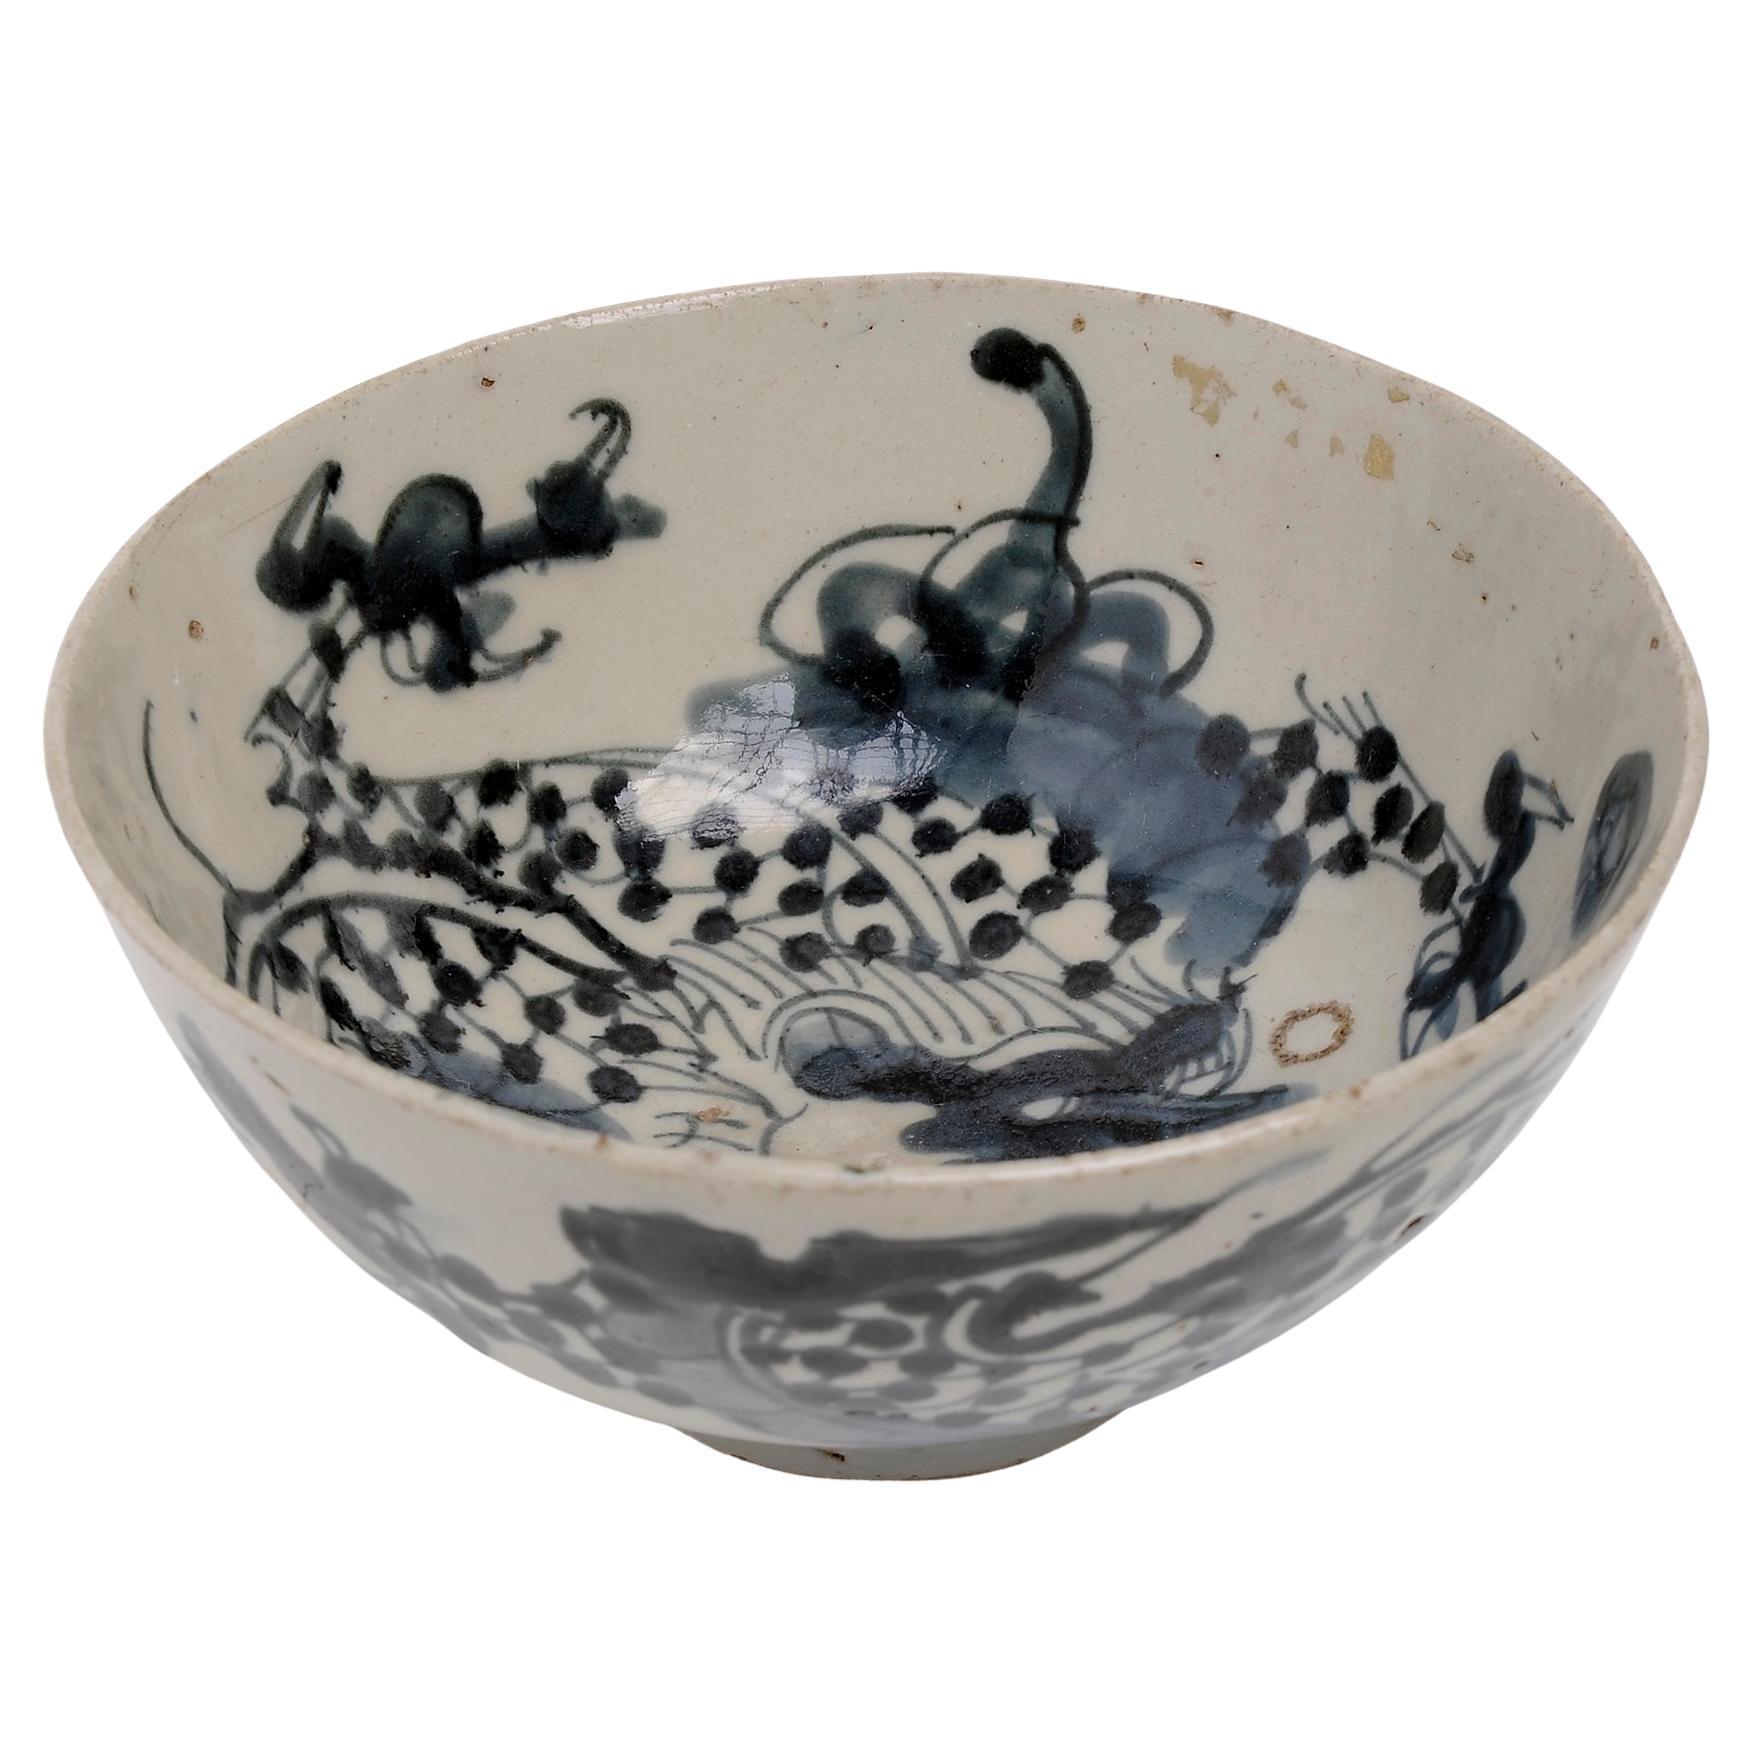 Ancient Japanese Bowl with Dragon